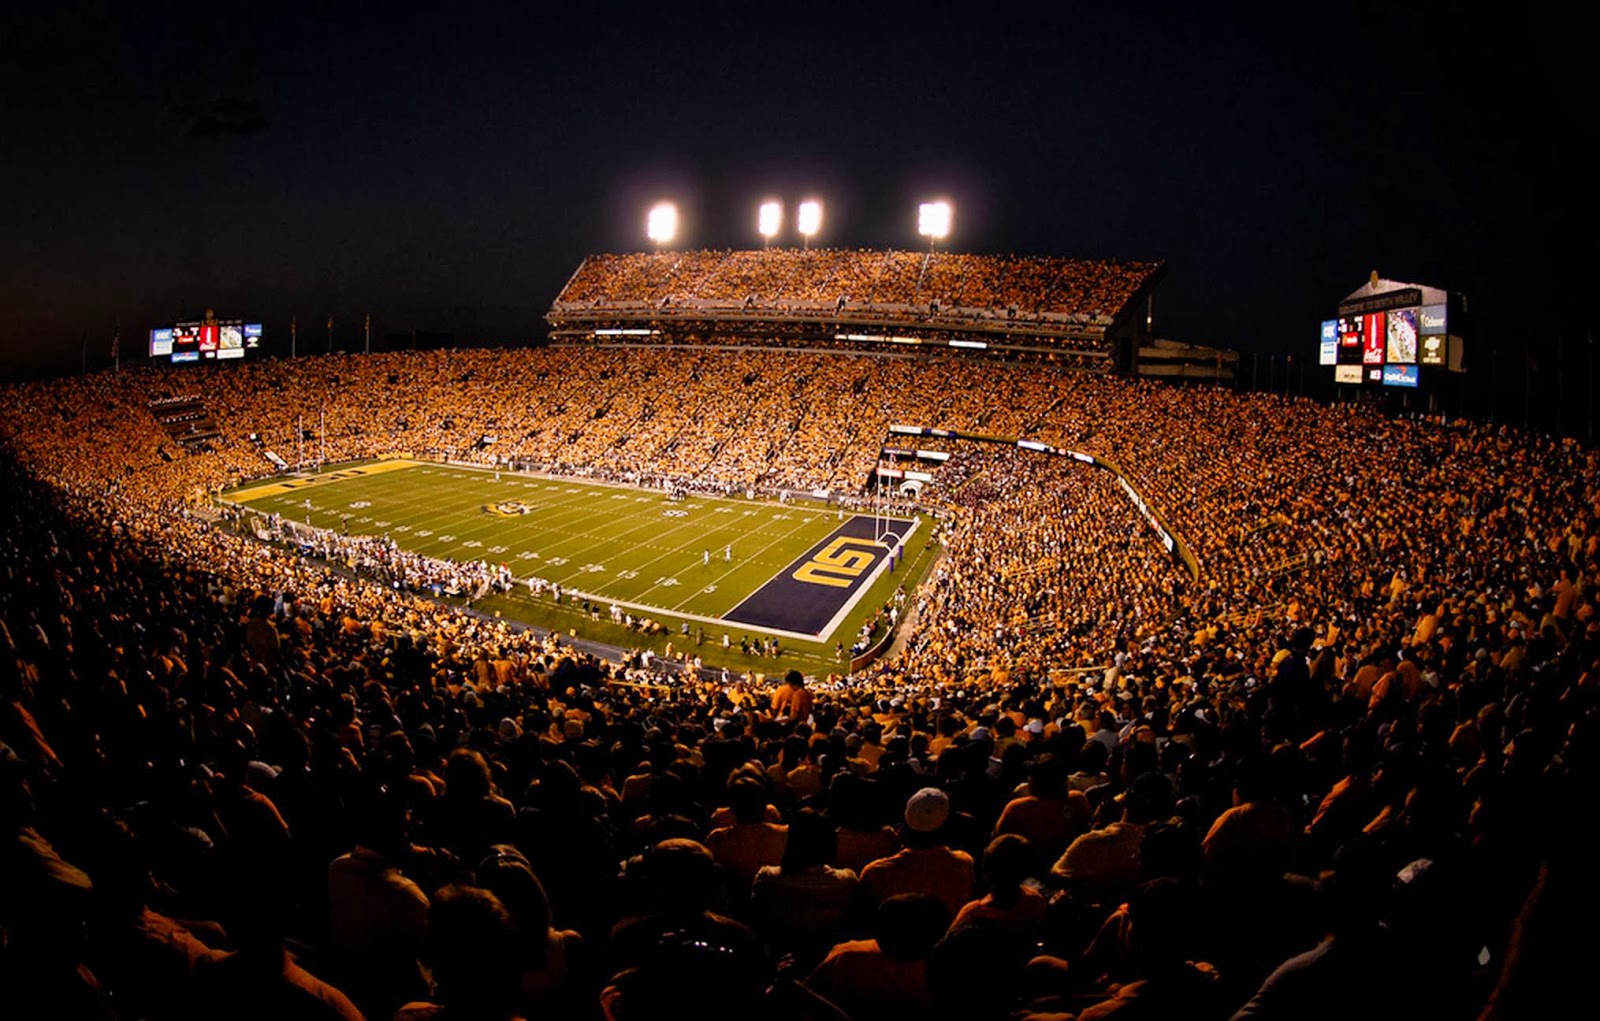 Lsu Tigers Football Stadium Pc Android iPhone And iPad Wallpaper